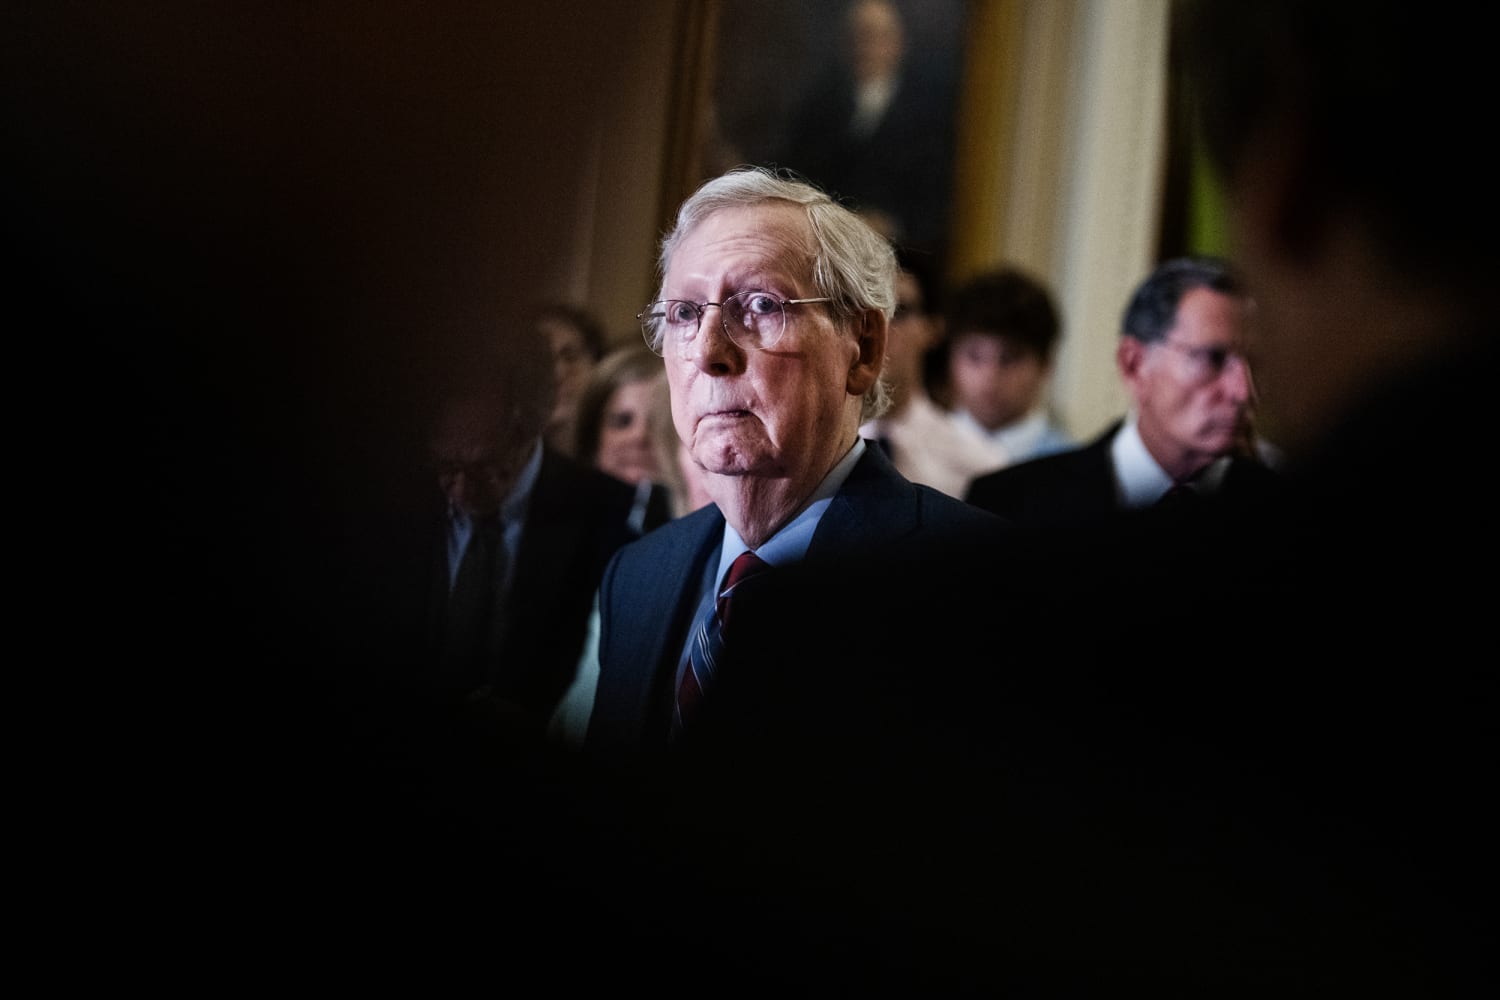 At a Kentucky event, Sen.  Mitch McConnell froze again